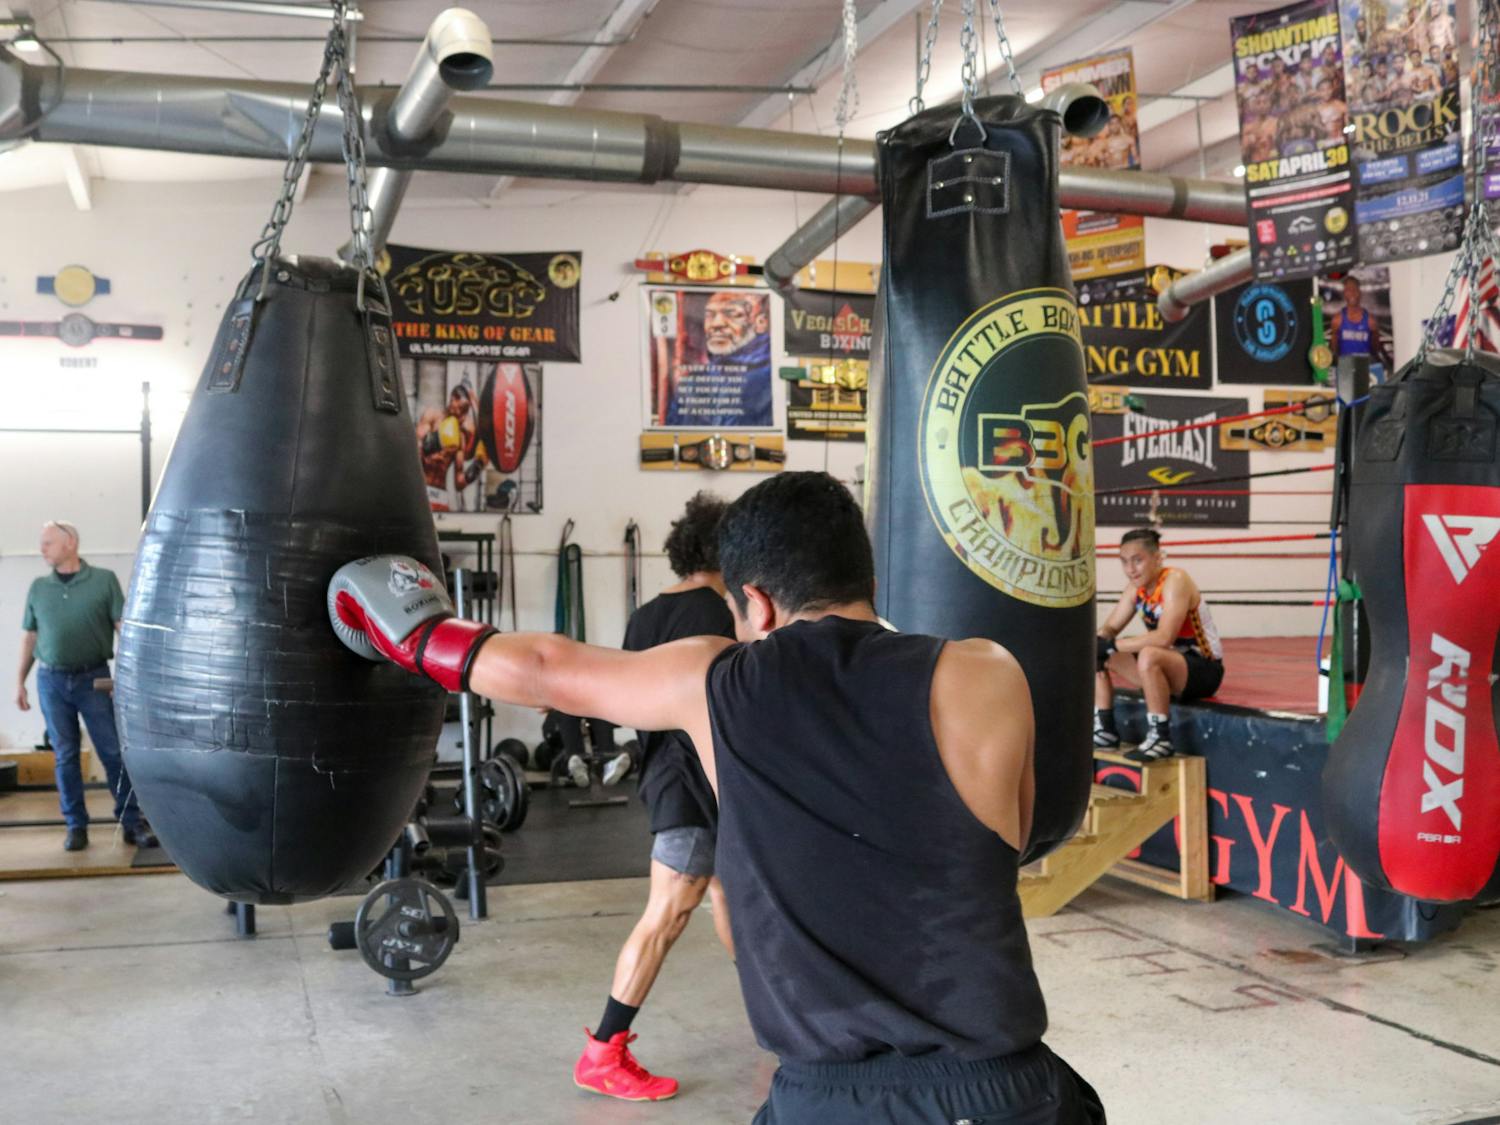 Gamecock Boxing Club member, Edgar Cardenas, punches the punching bag during a practice on Monday afternoon, Sept. 12, 2022, at Battle Boxing Gym to begin training for their upcoming season.